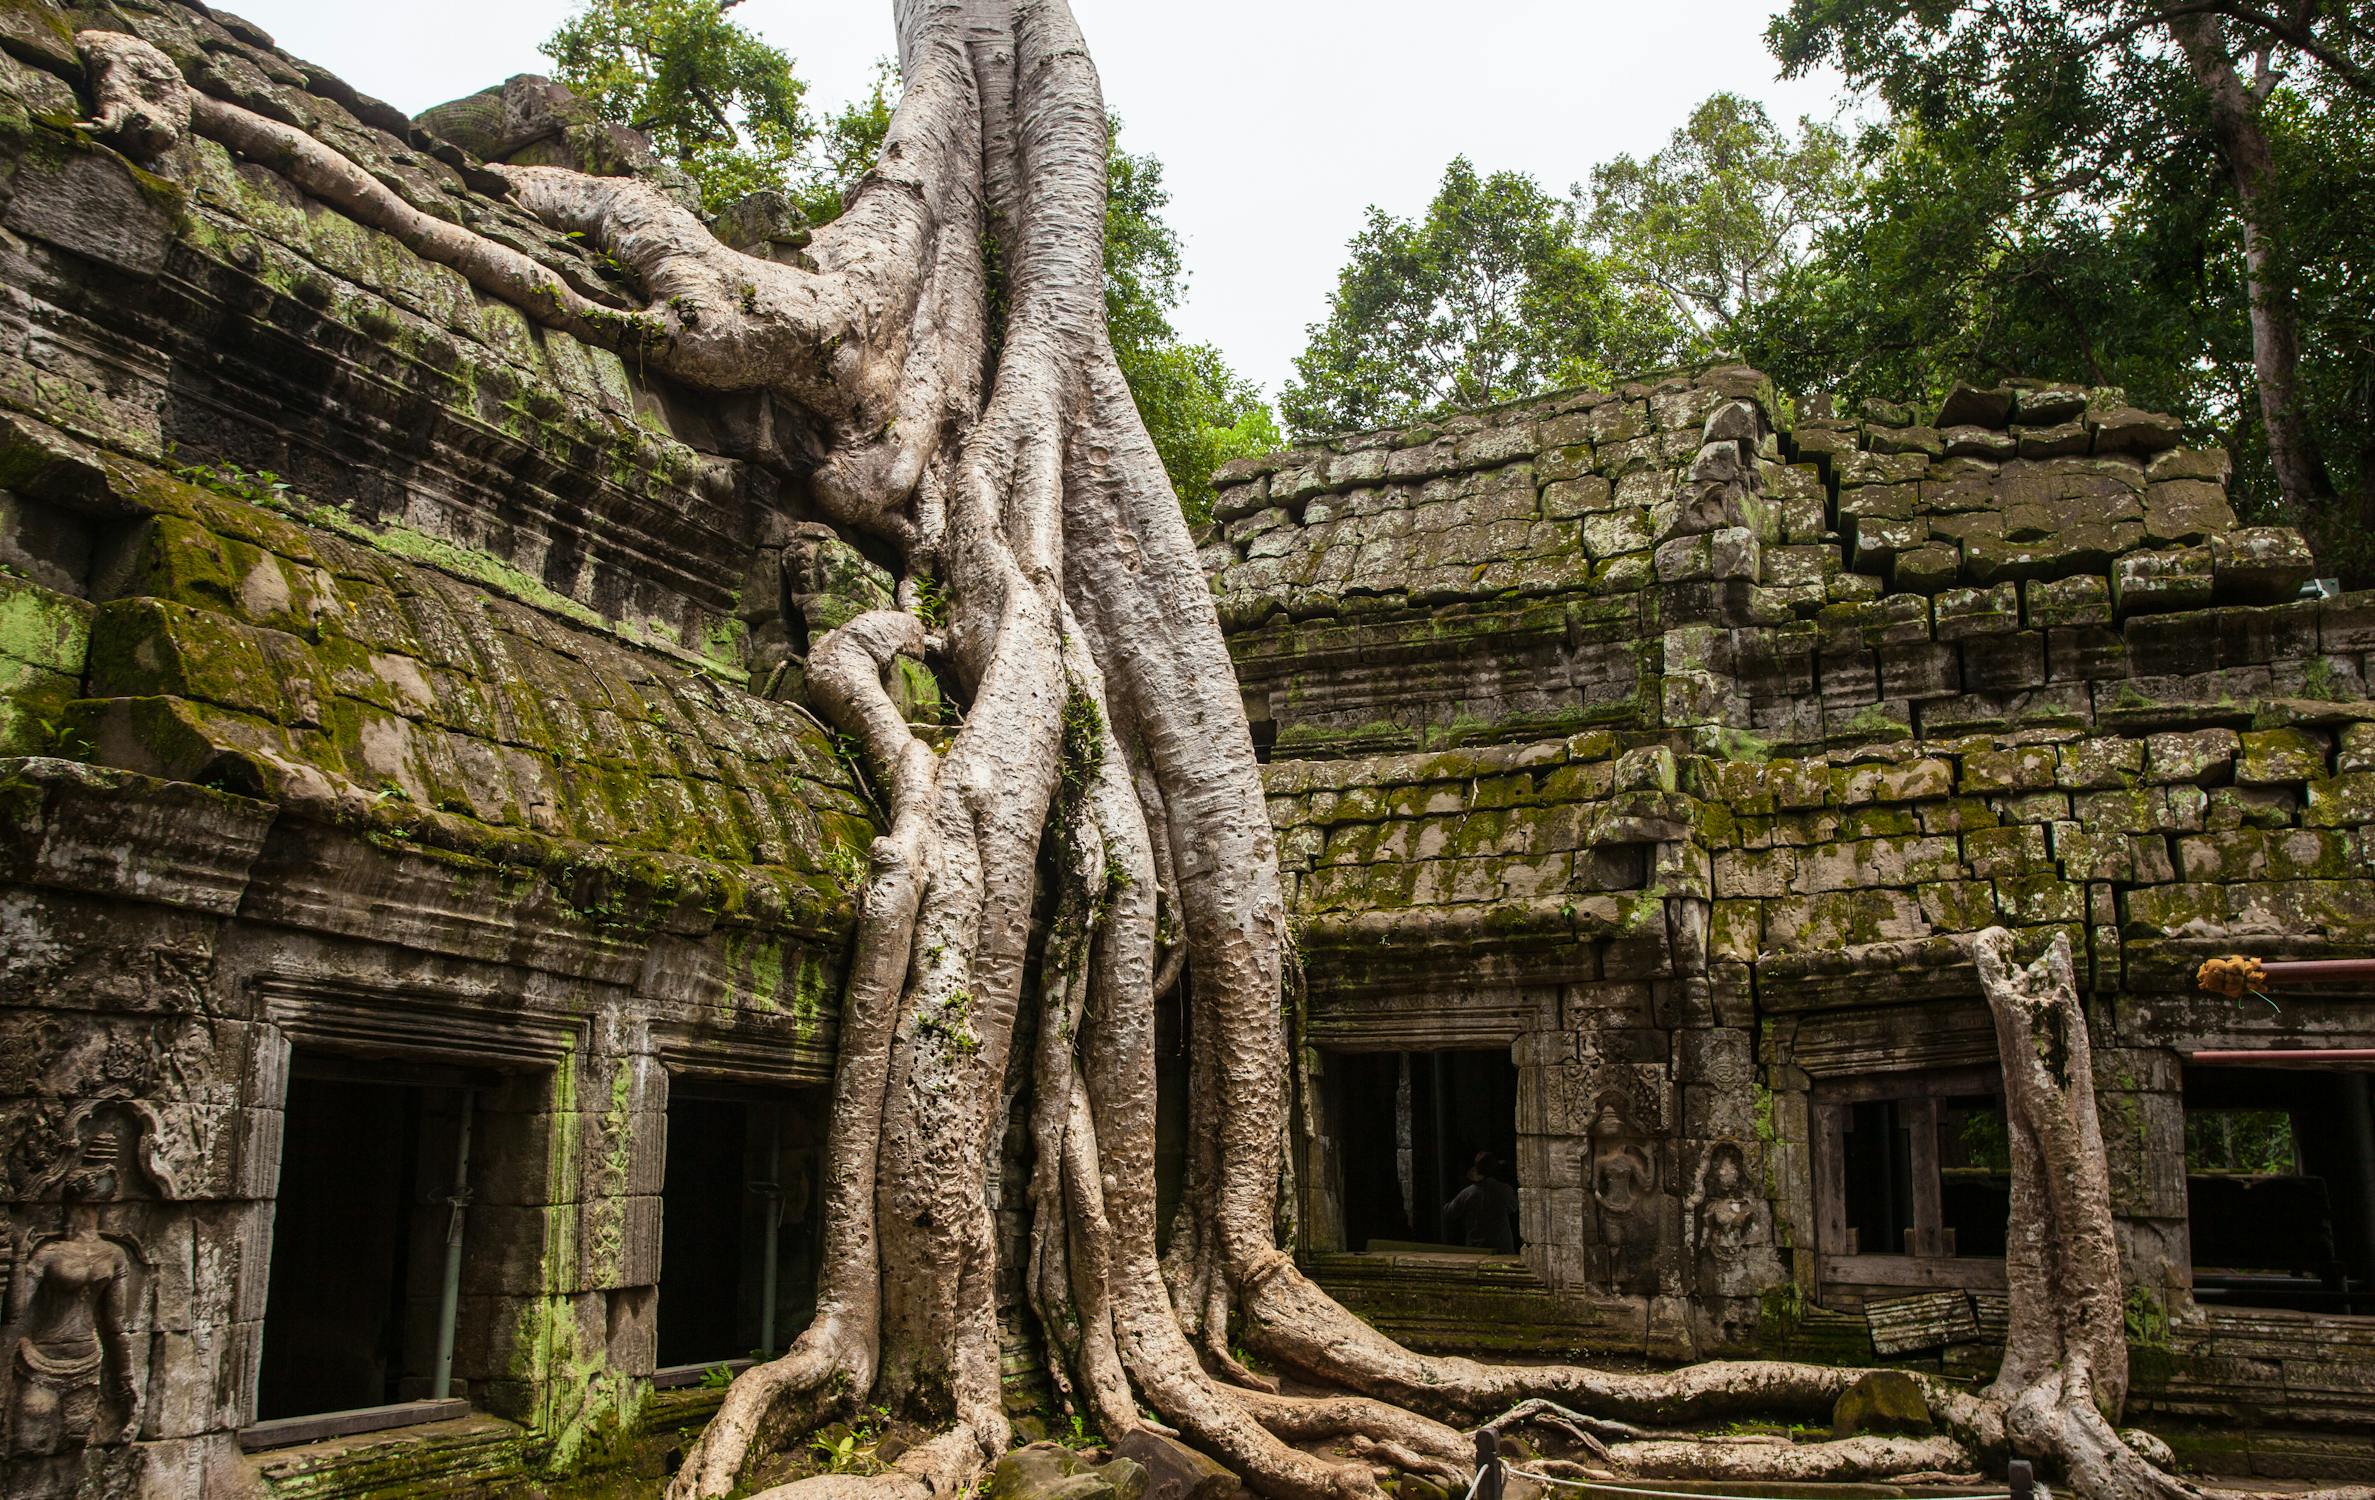 7-Day Siem Reap Itinerary: The Ultimate Guide to Angkor Wat